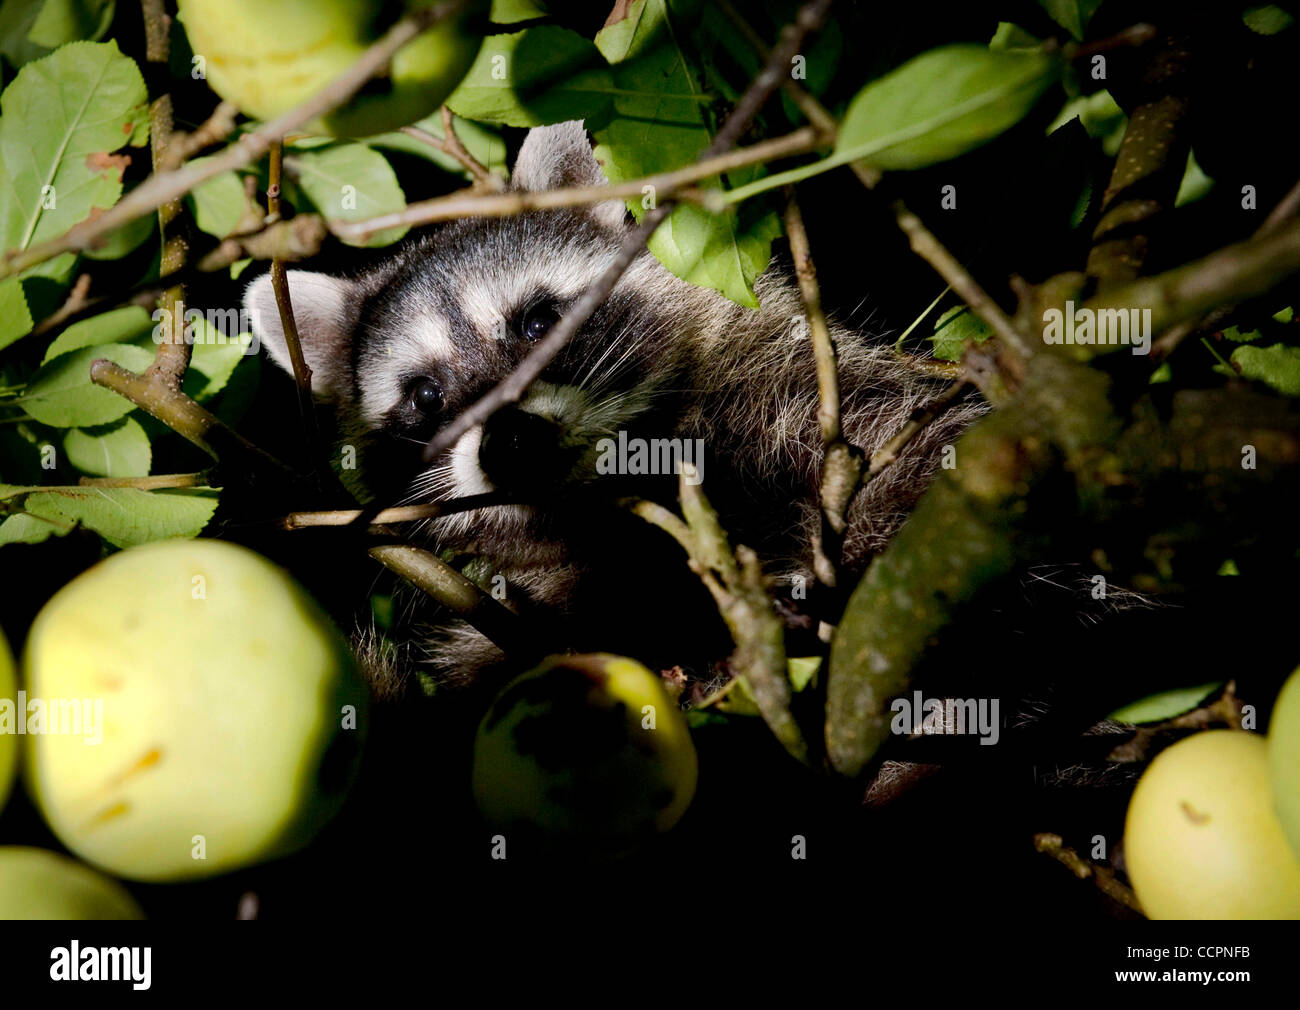 Oct. 11, 2010 - Elkton, Oregon, U.S - A raccoon is caught in the act of stealing apples from an orchard on a farm near Elkton. (Credit Image: © Robin Loznak/ZUMApress.com) Stock Photo